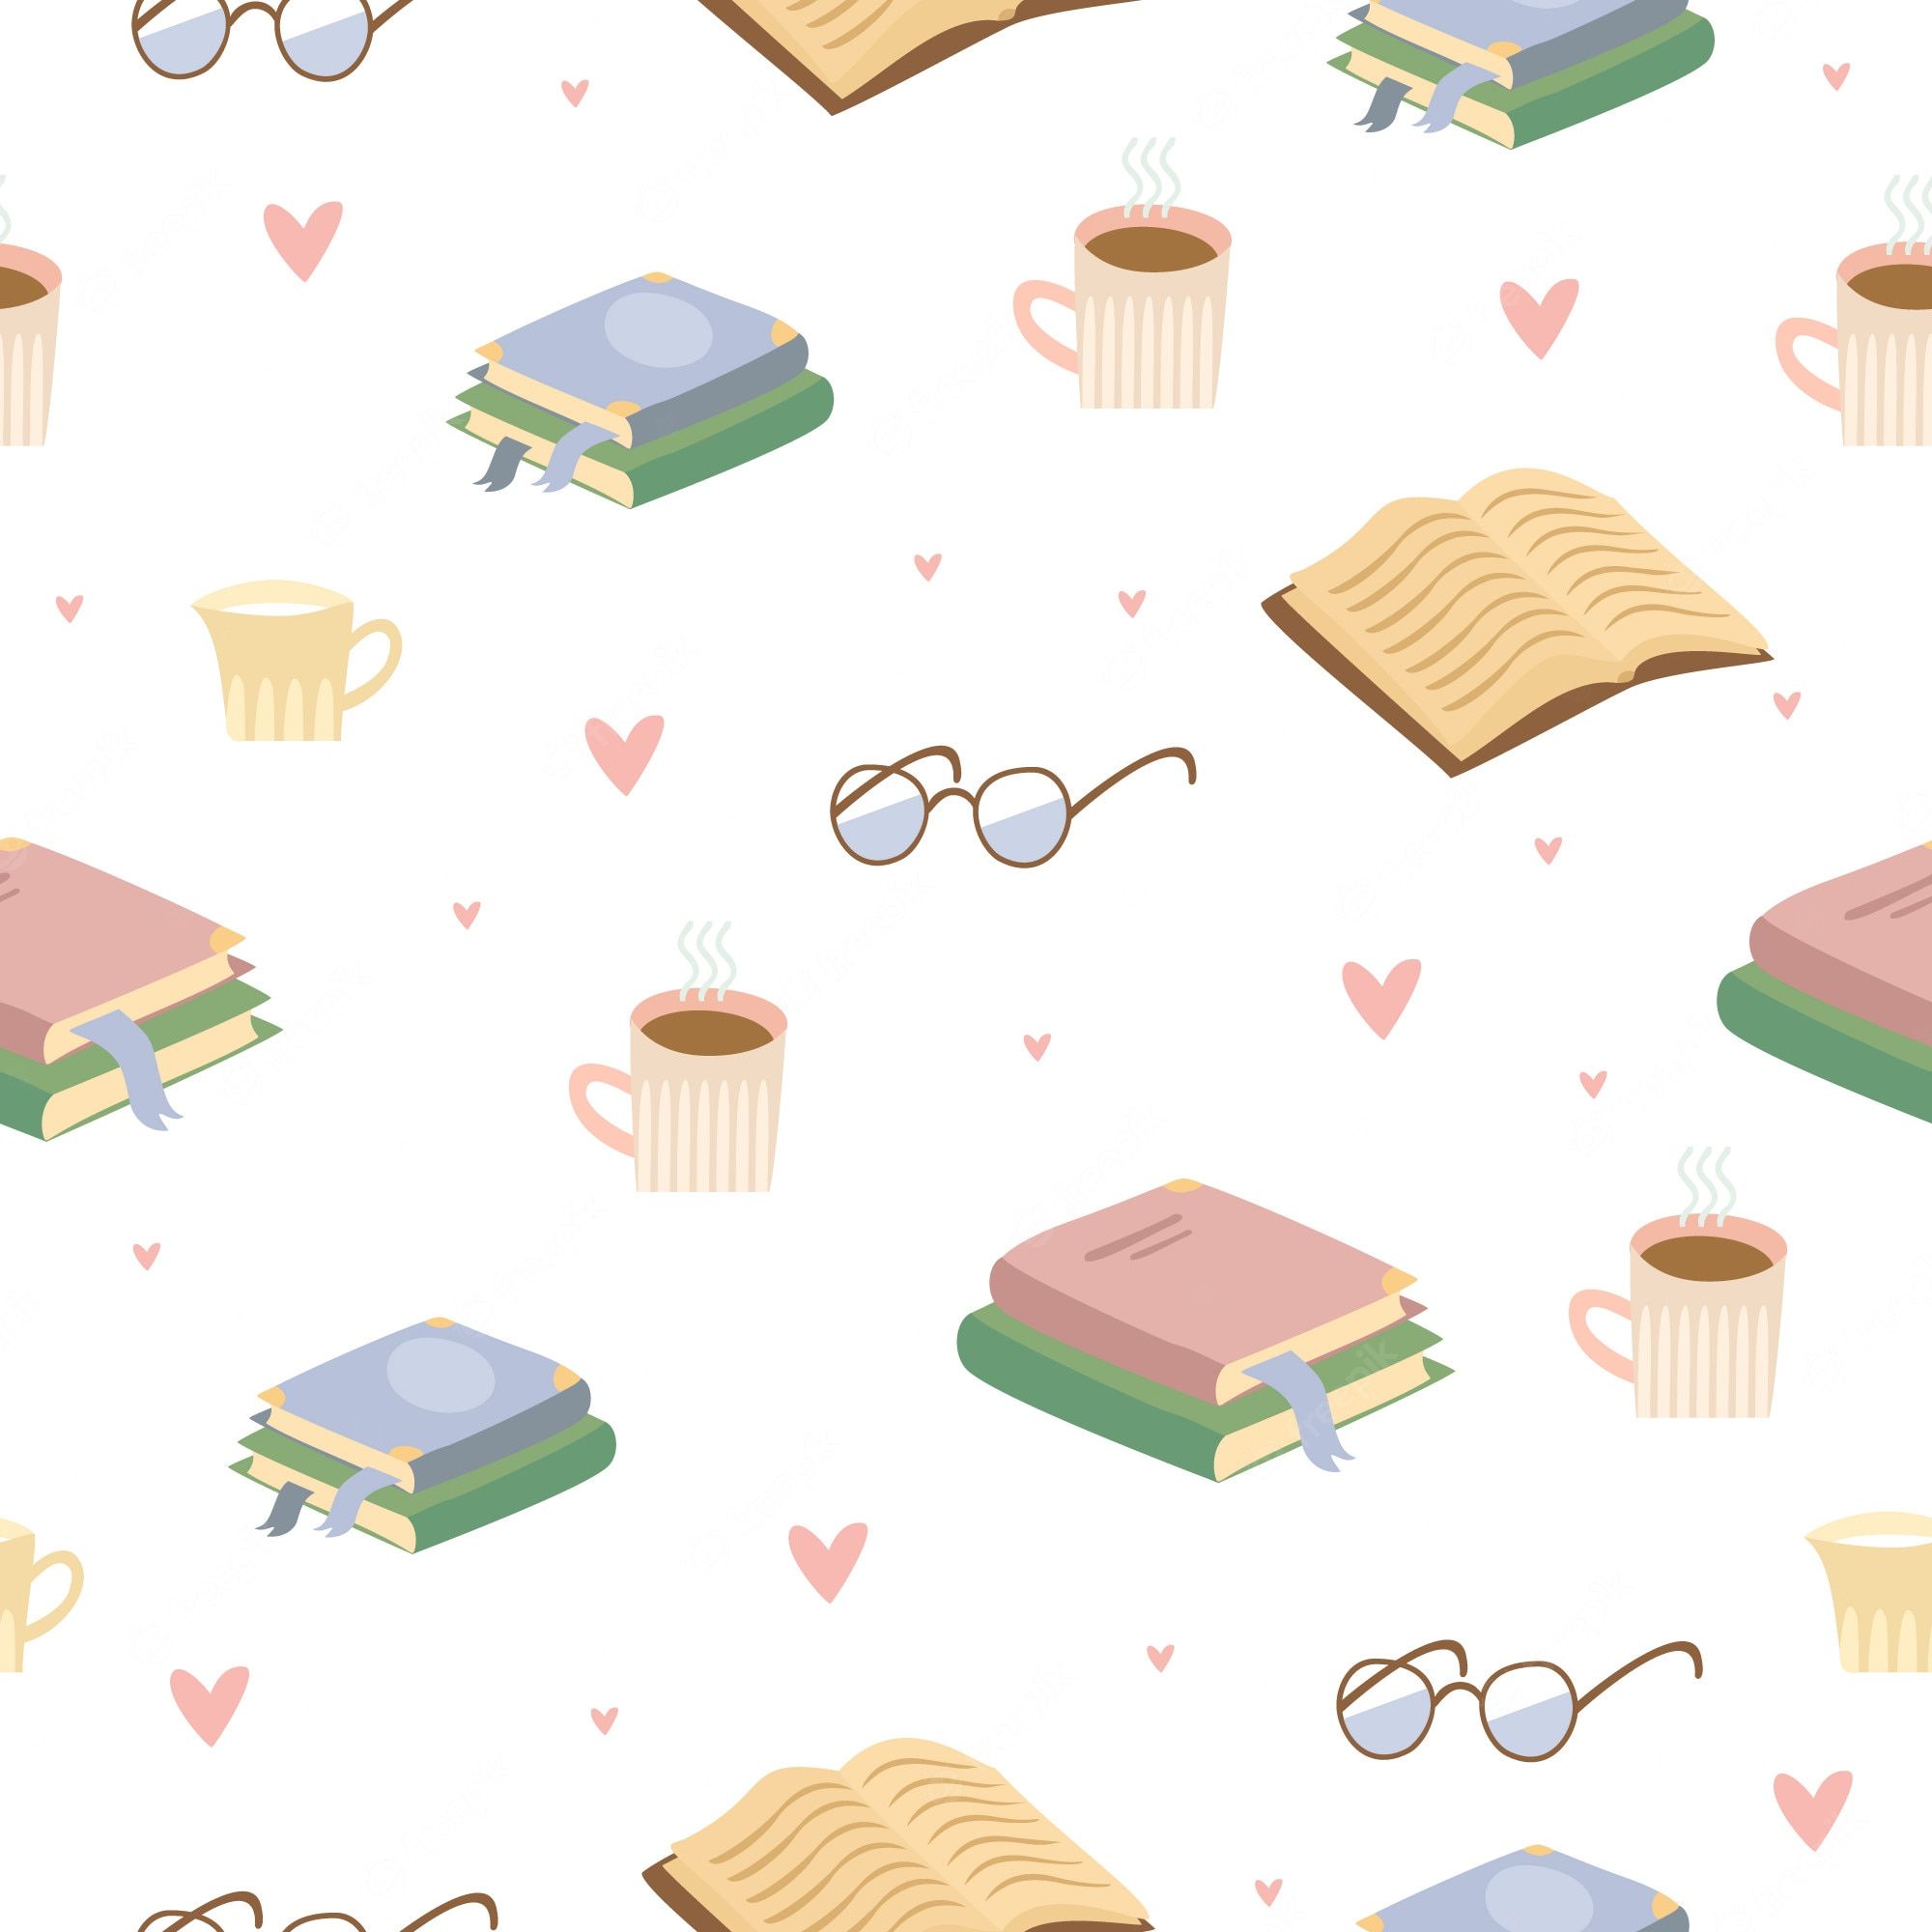 A pattern of books, cups of coffee, glasses, and hearts. - Books